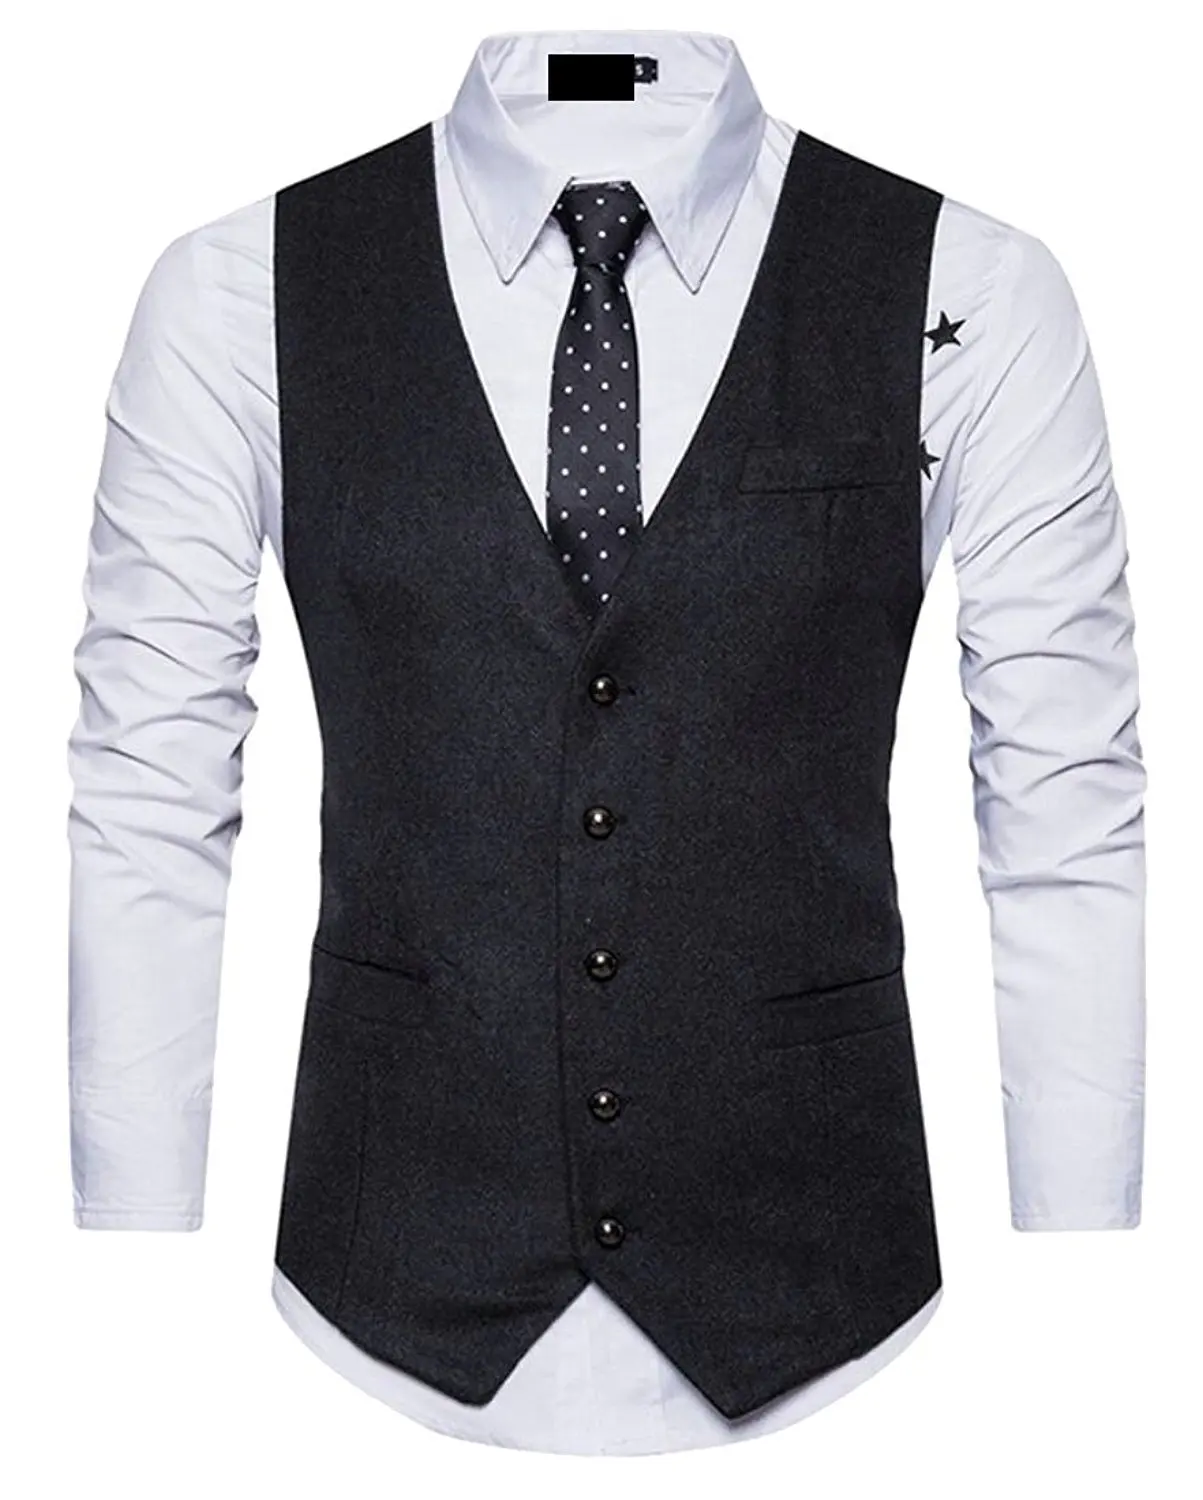 Cheap Suit Waistcoats, find Suit Waistcoats deals on line at Alibaba.com